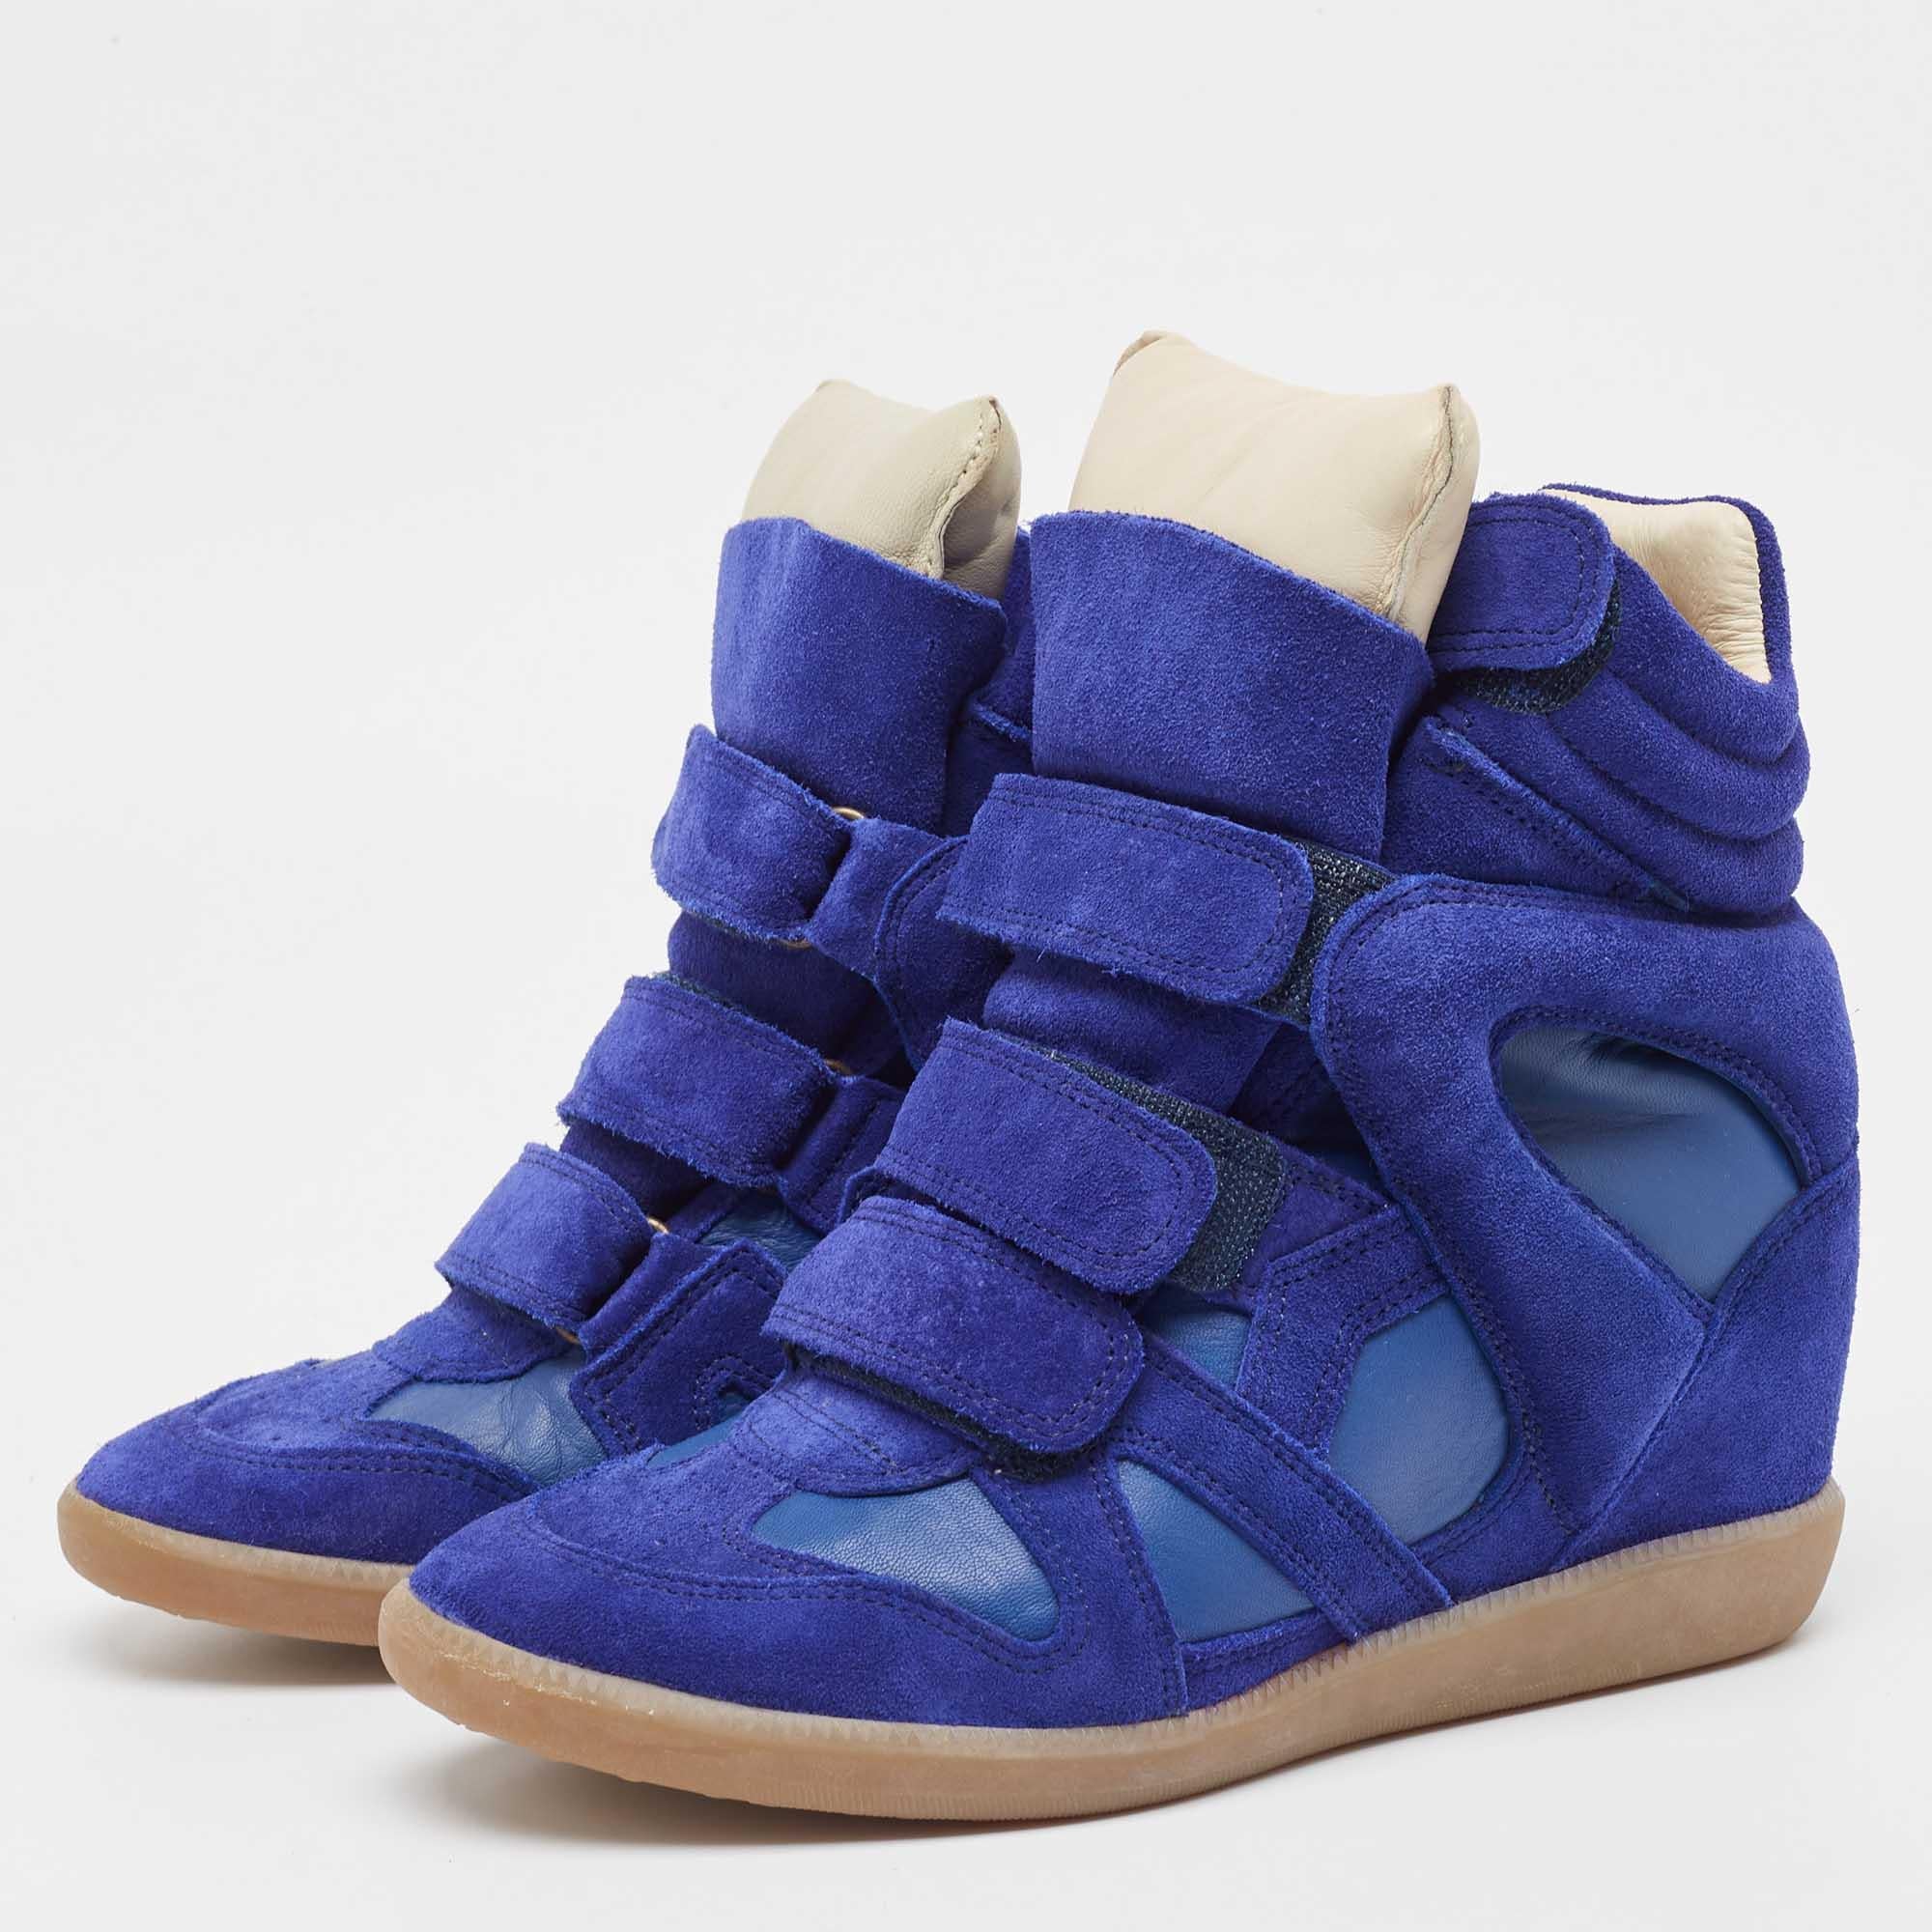 Isabel Marant Blue Suede and Leather Bekett Wedge Sneakers Size 38 In Good Condition For Sale In Dubai, Al Qouz 2